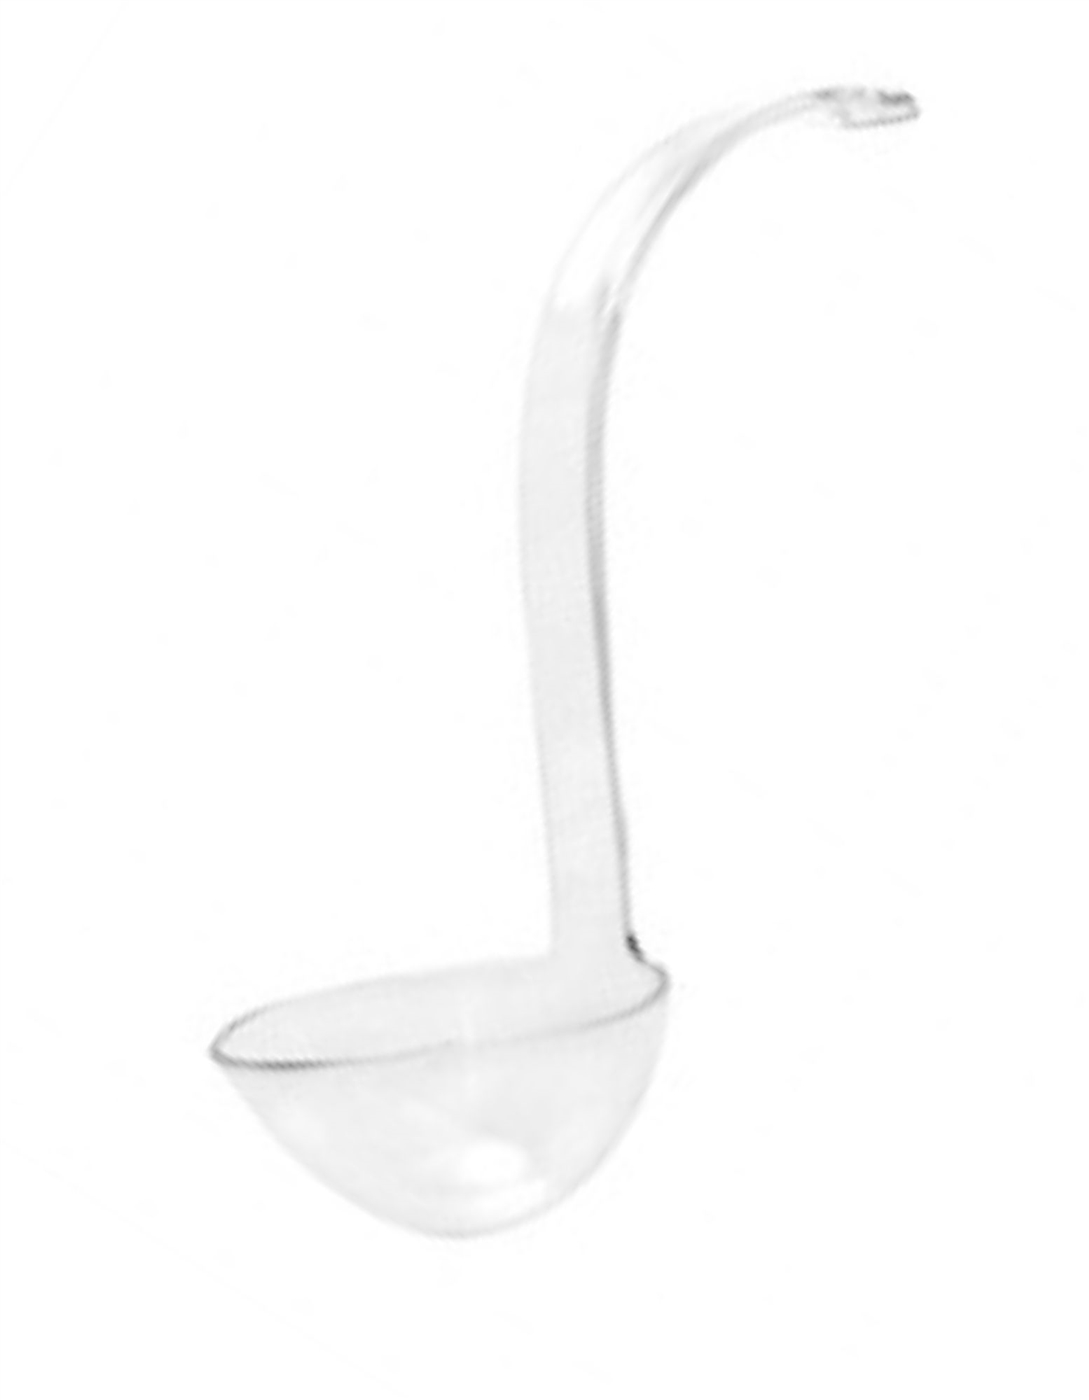 Clear Serving Ladle - Durable Disposable Serving Utensils & Trays